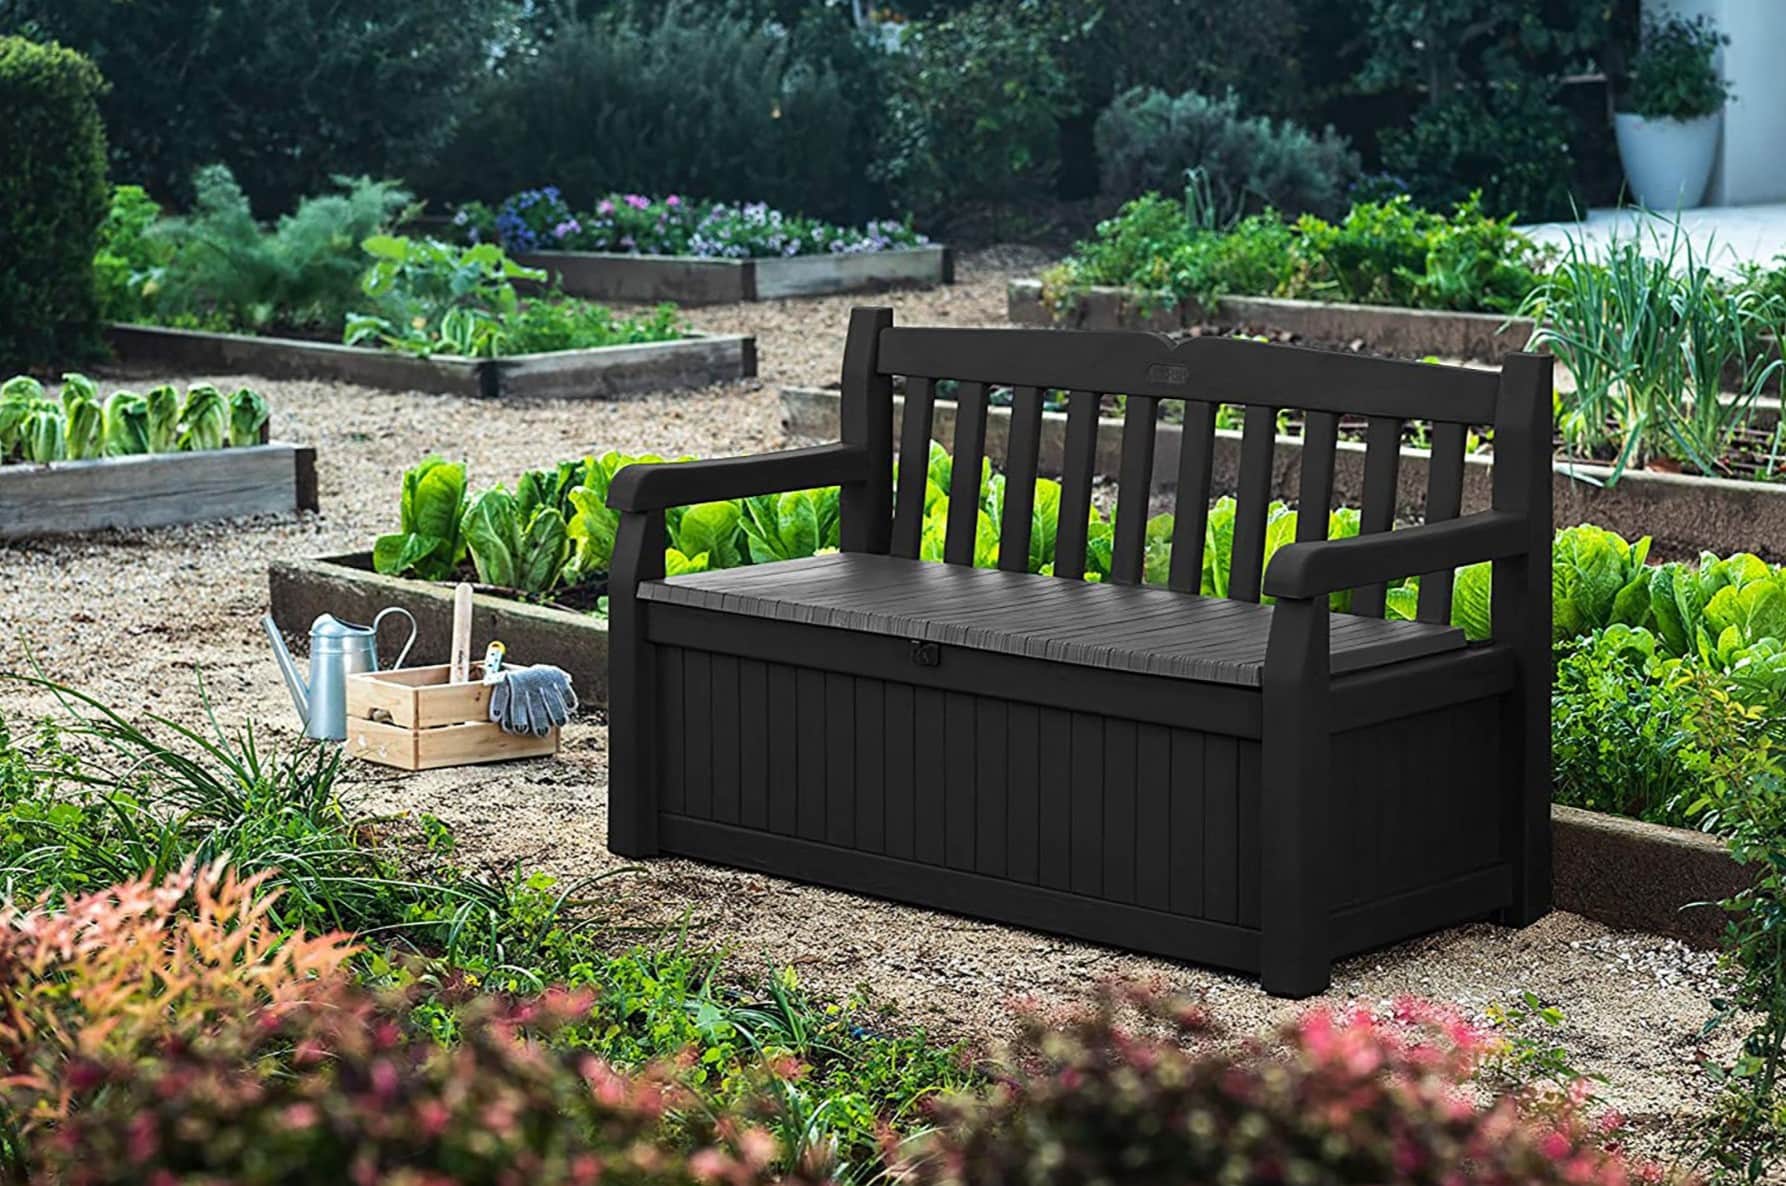 How To Build An Outdoor Storage Bench